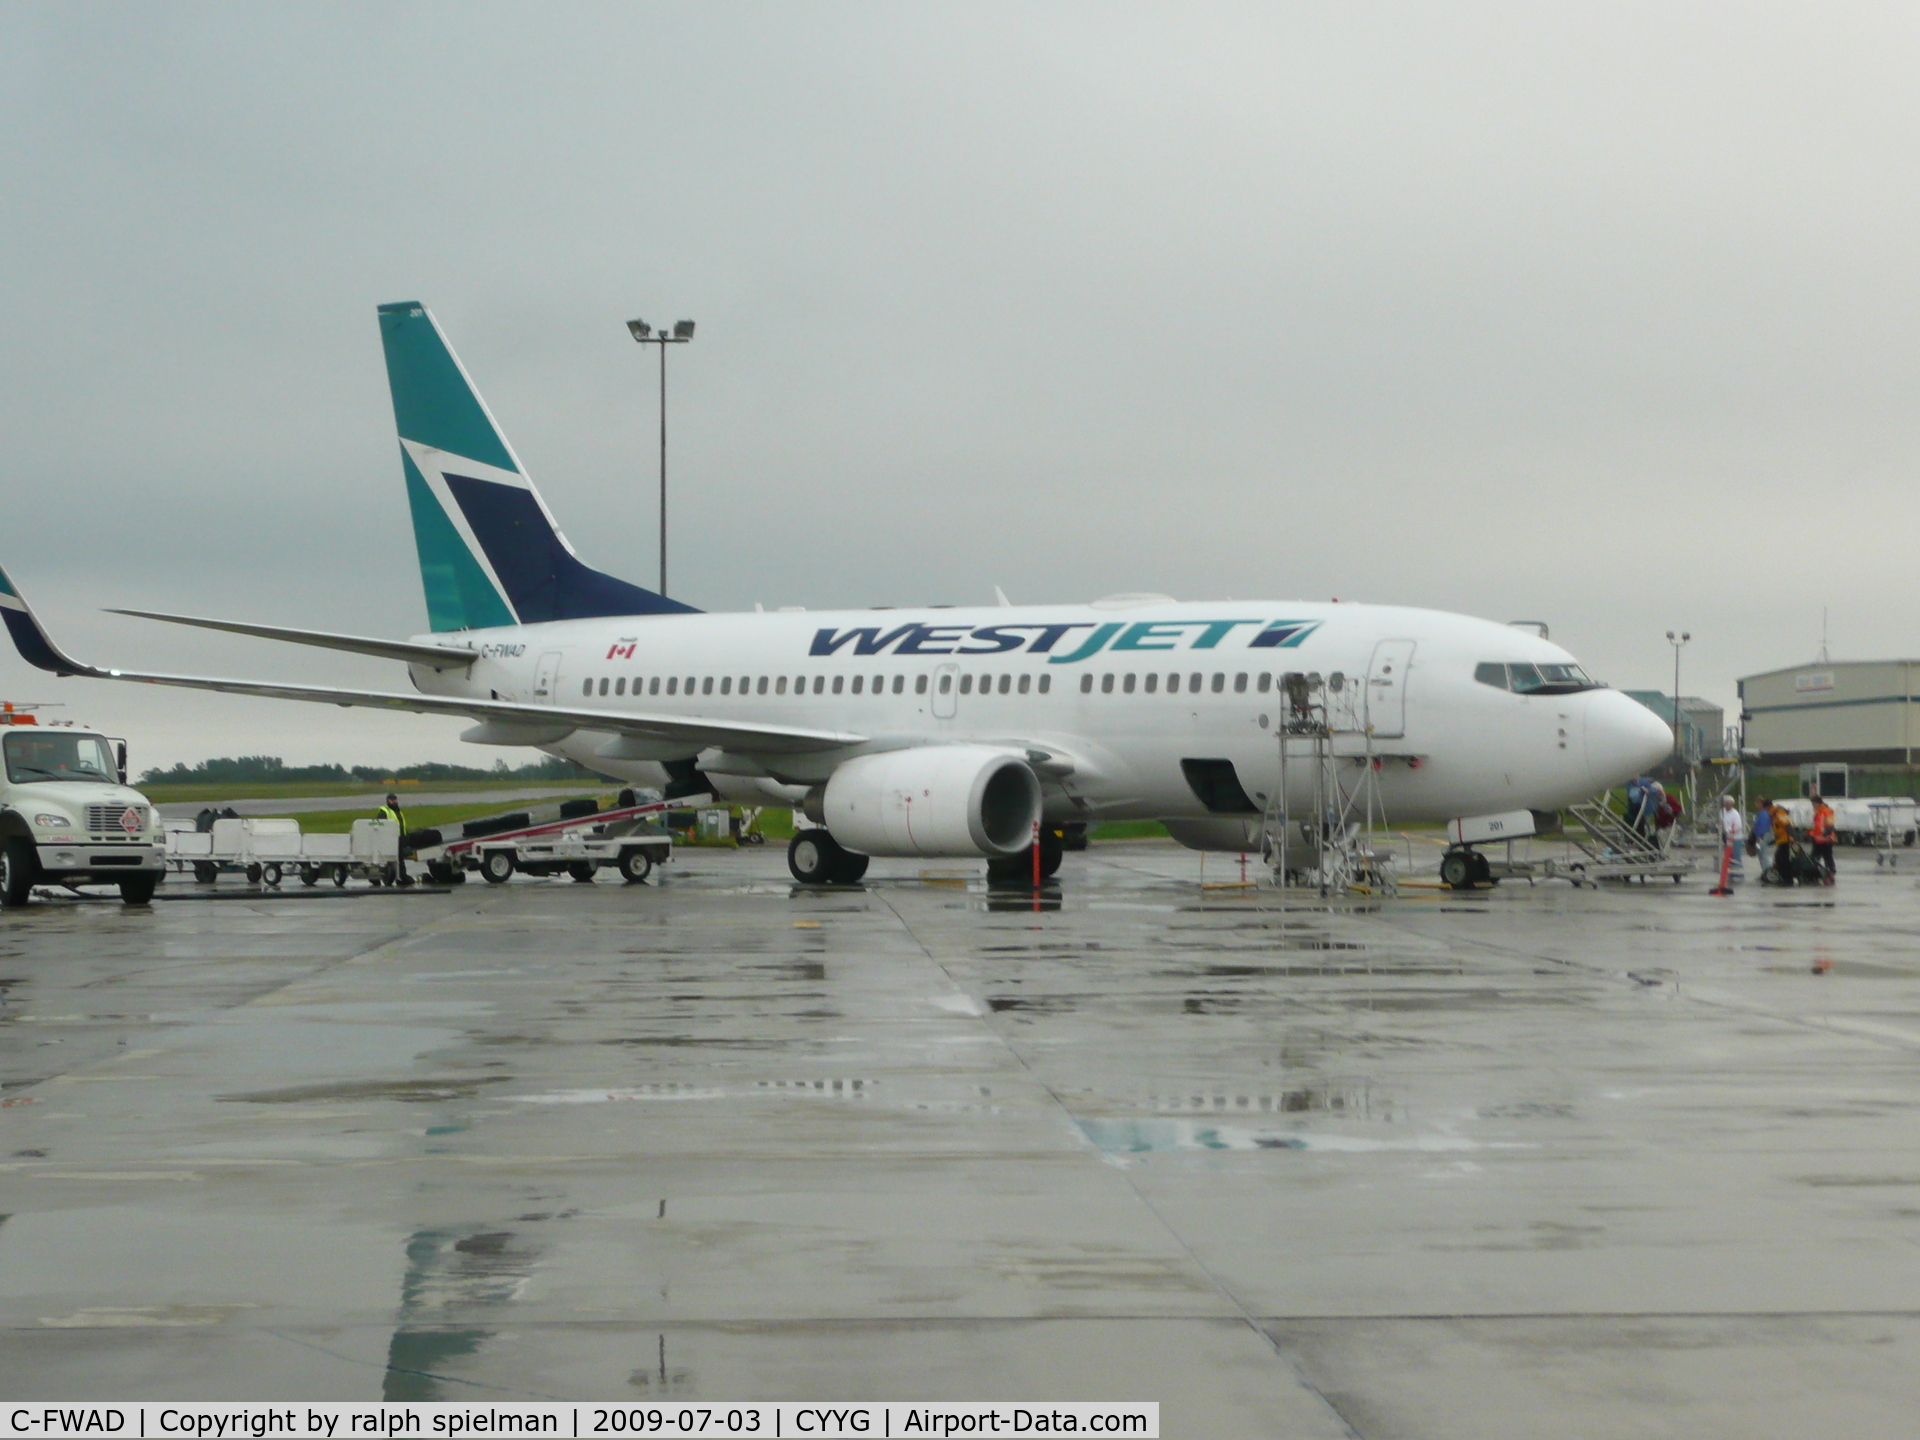 C-FWAD, 2002 Boeing 737-7CT C/N 32753, Aircraft in Charlottetown, PE on a rainy day